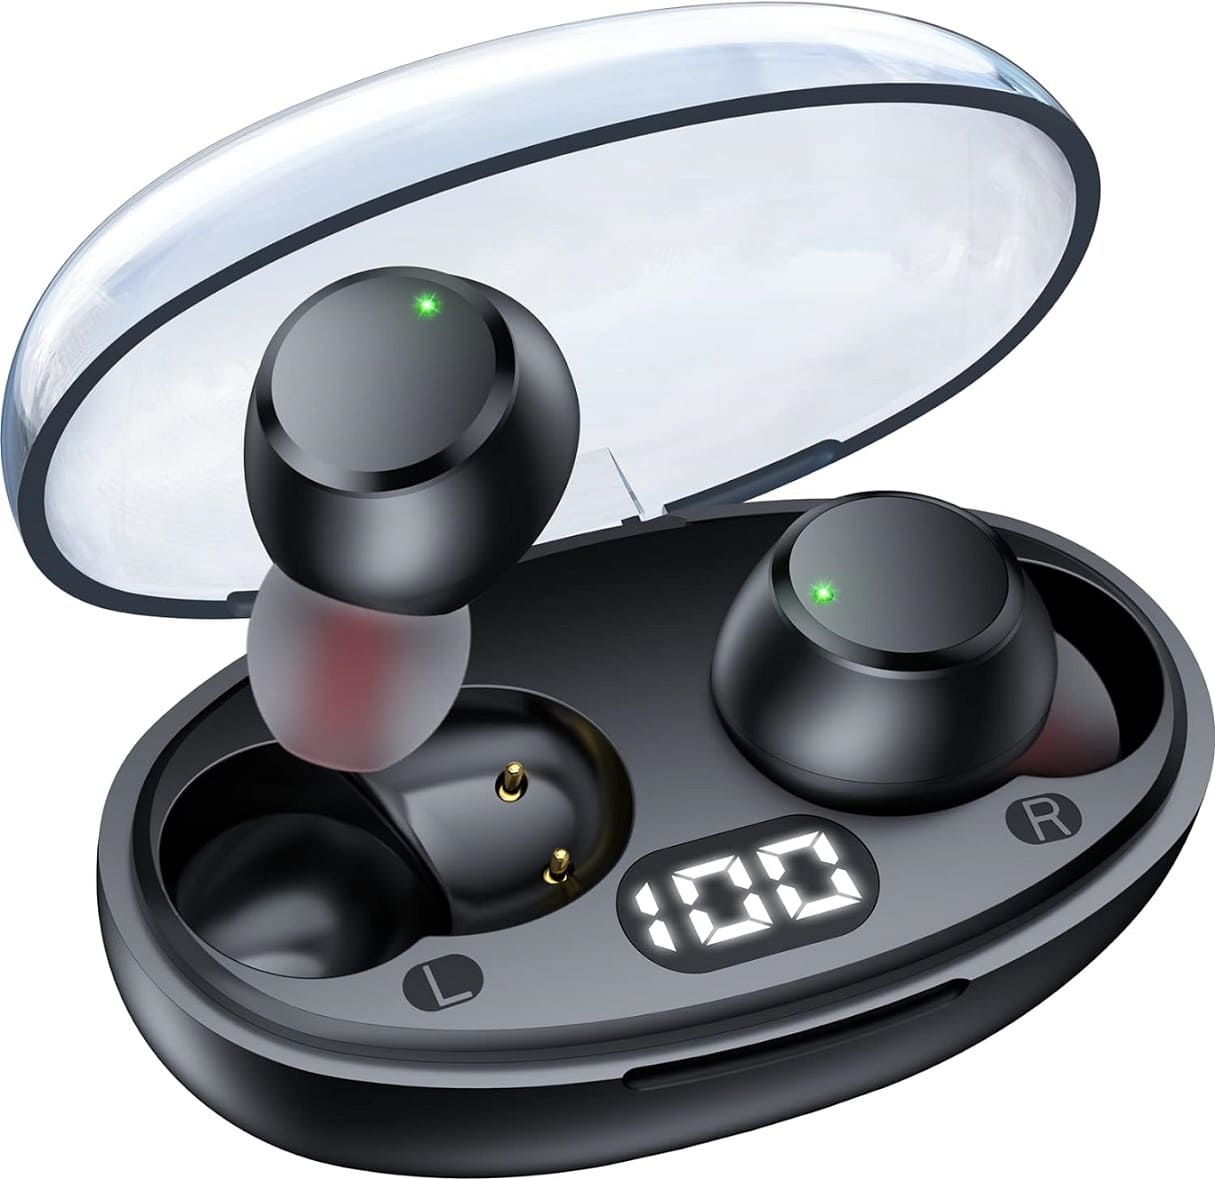 How to turn on or off ZINGBIRD T62 Earbuds?